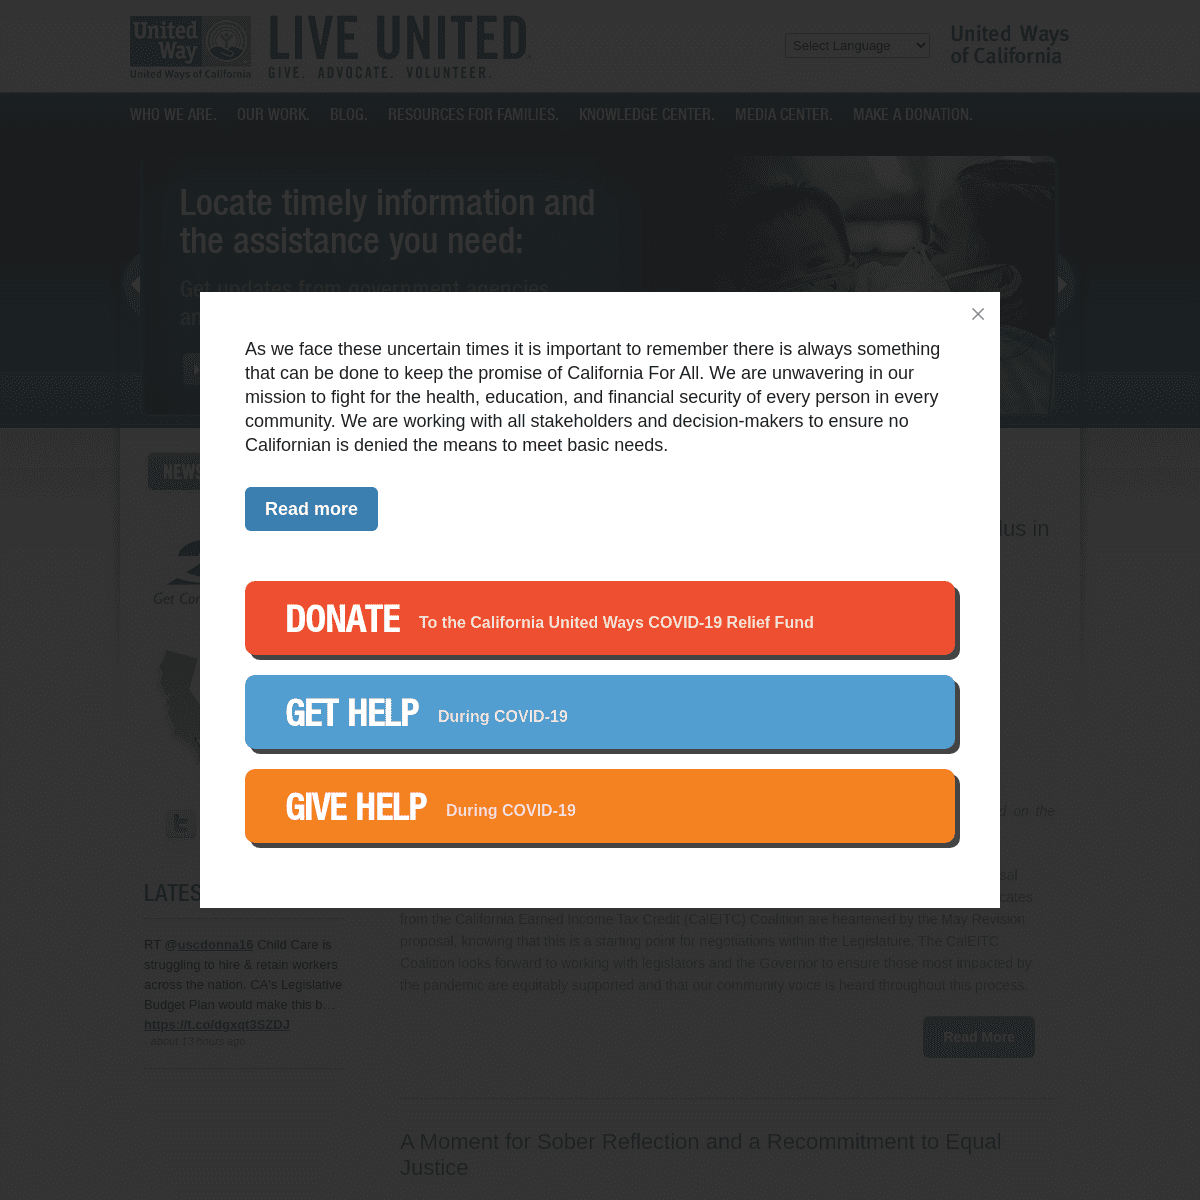 A complete backup of https://unitedwaysca.org